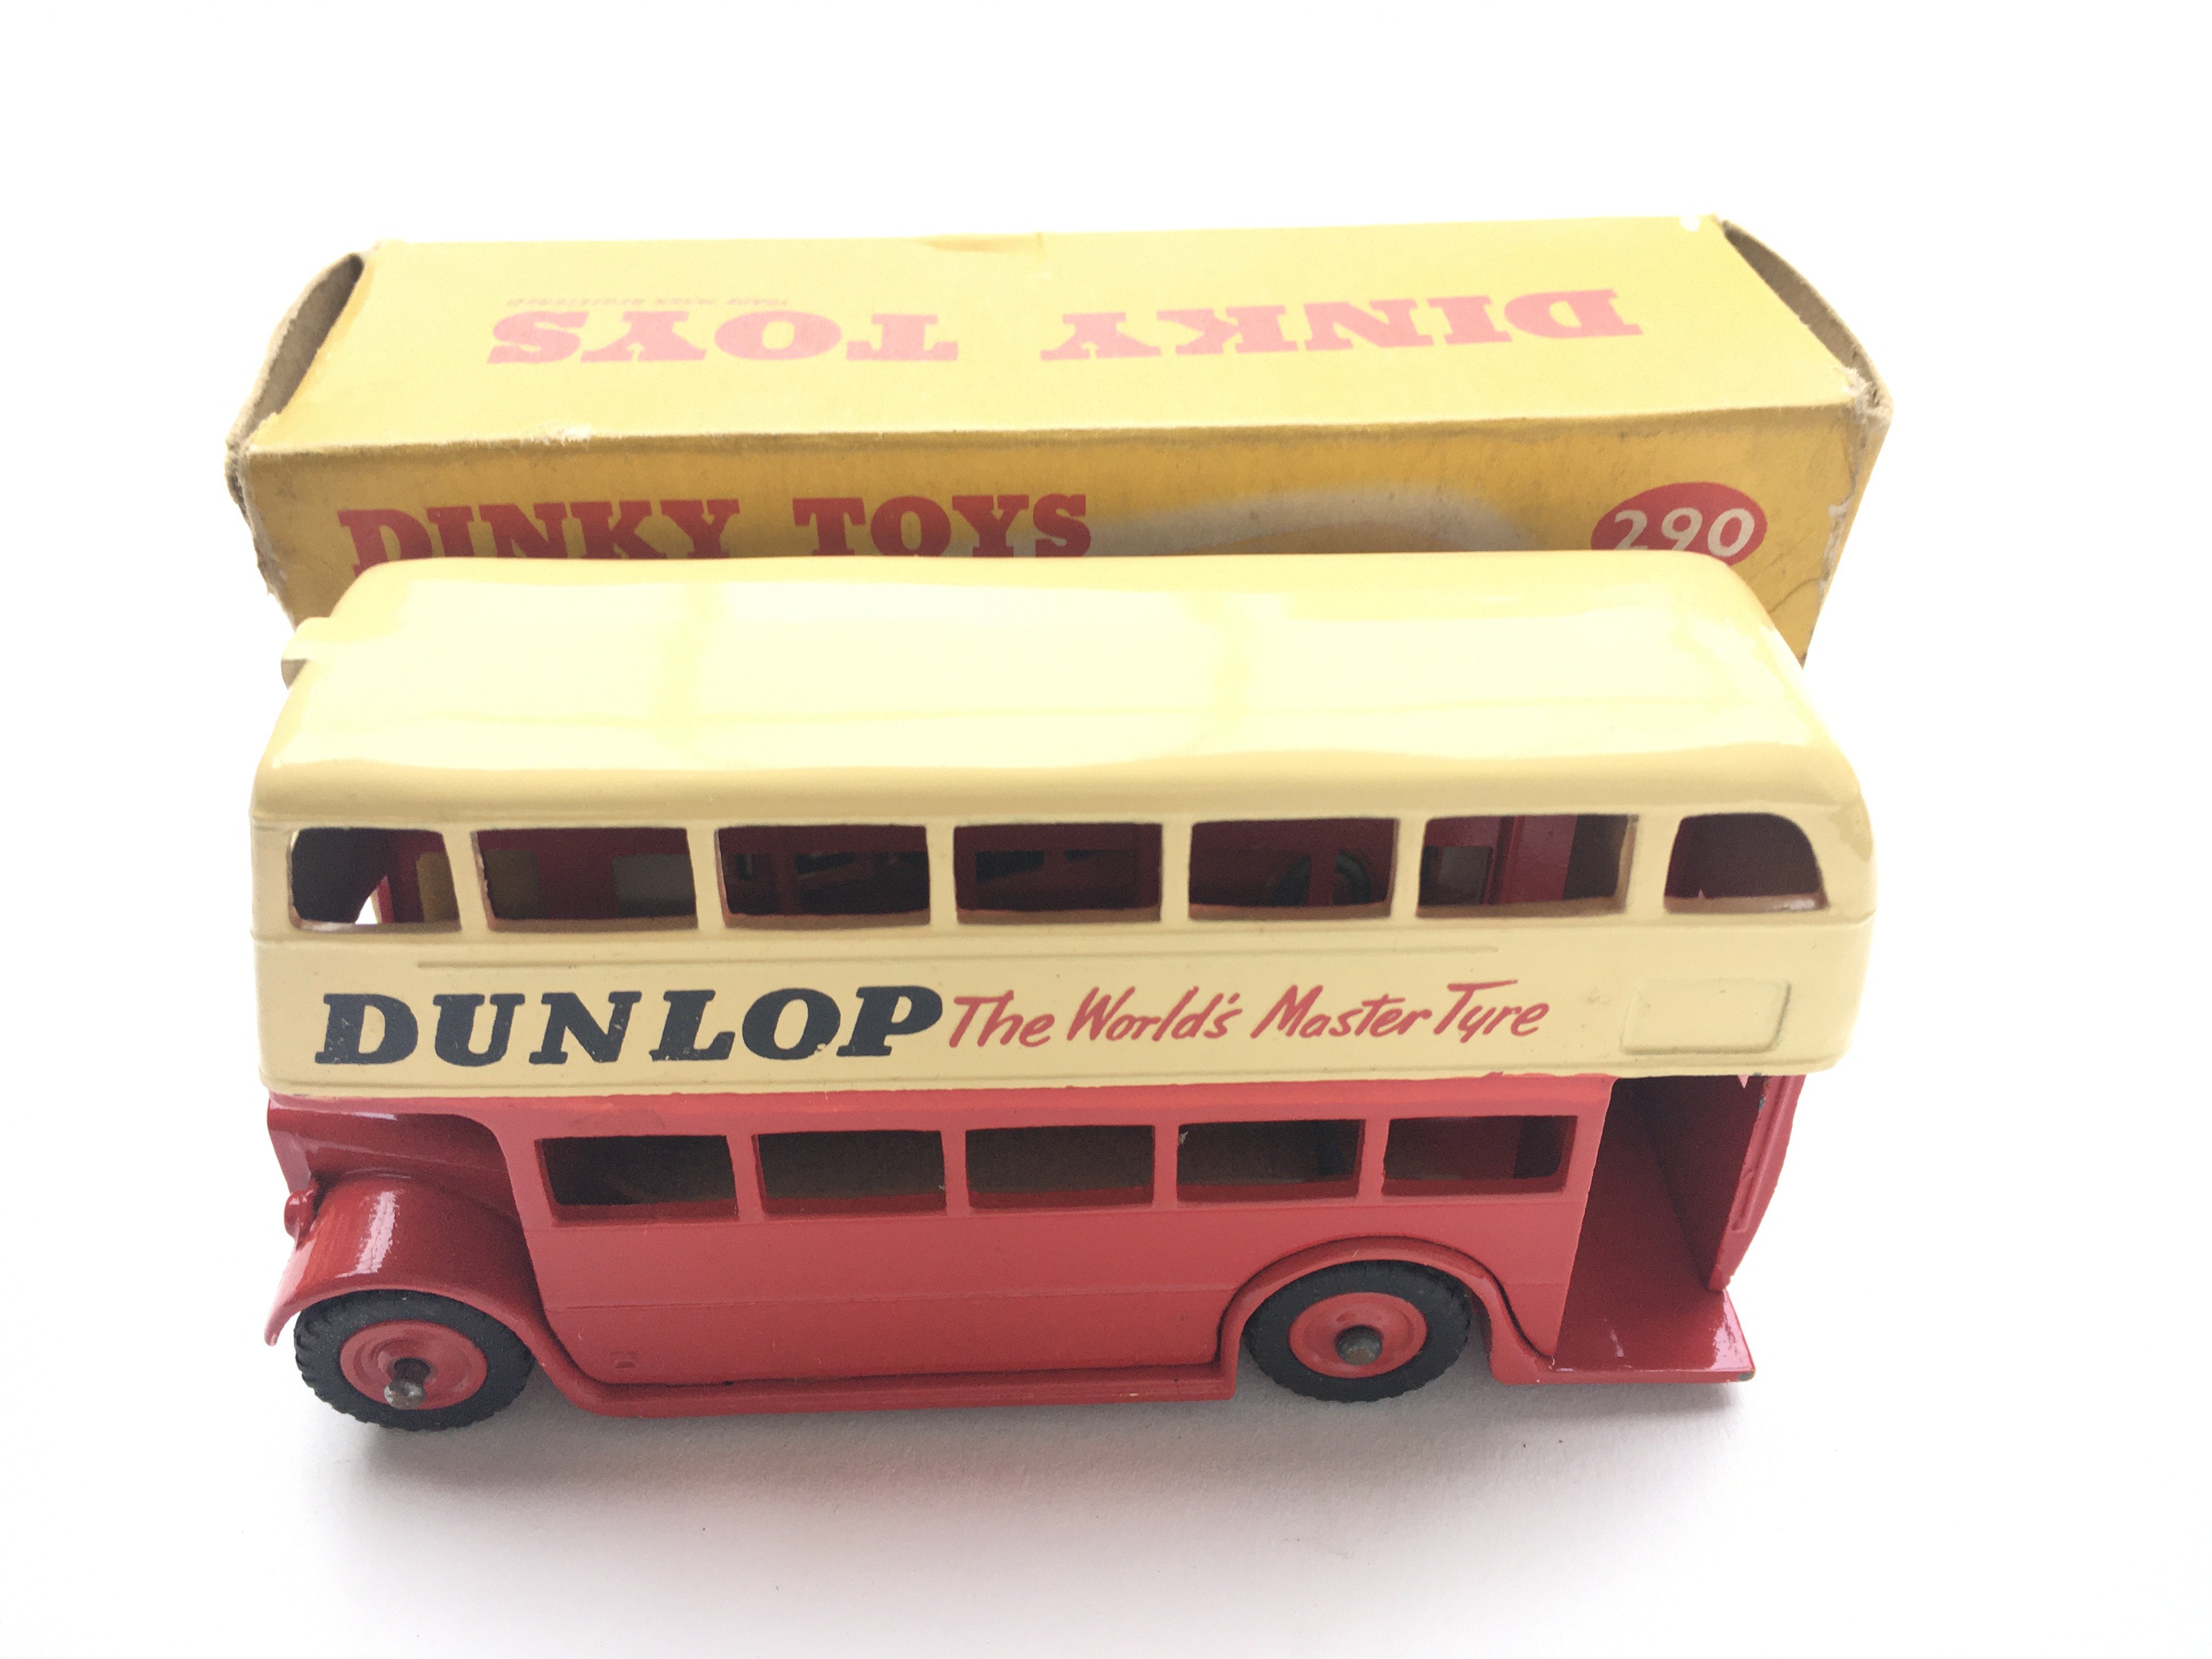 A Dinky Double Deck bus #290, a Dinky London bus # - Image 3 of 5